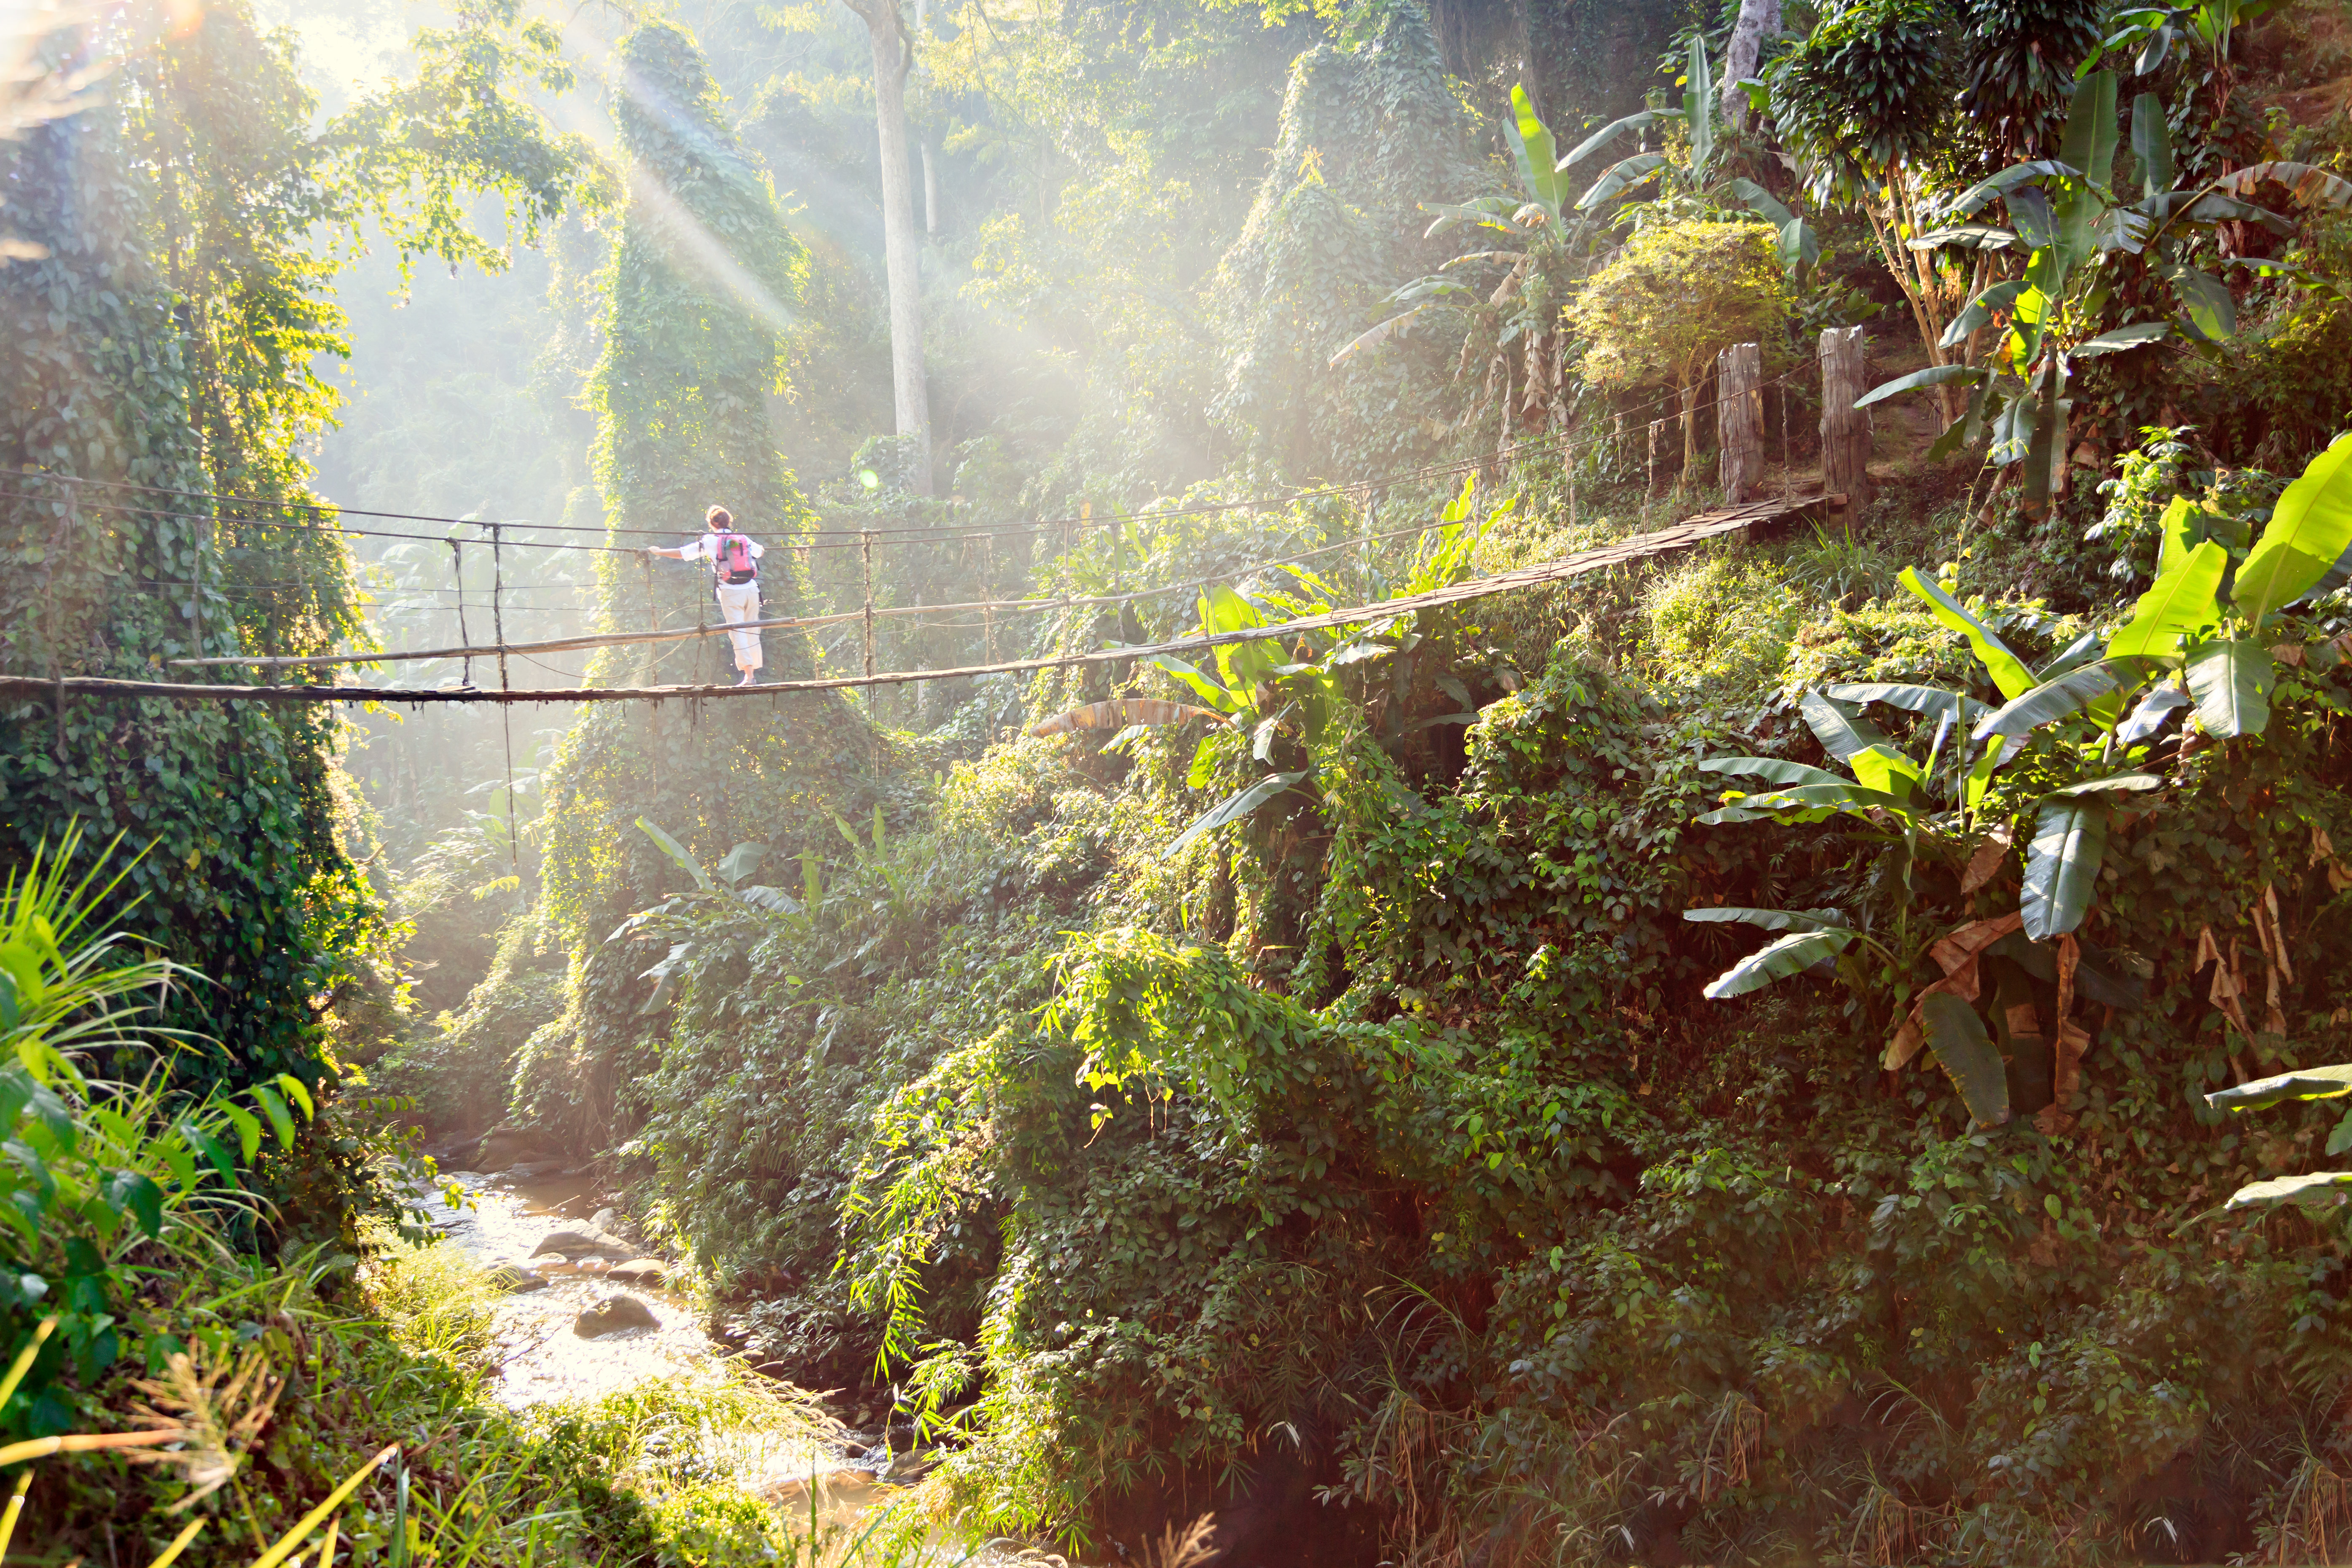 Woman with backpack on suspension bridge in rainforest 509184494+5580x3720